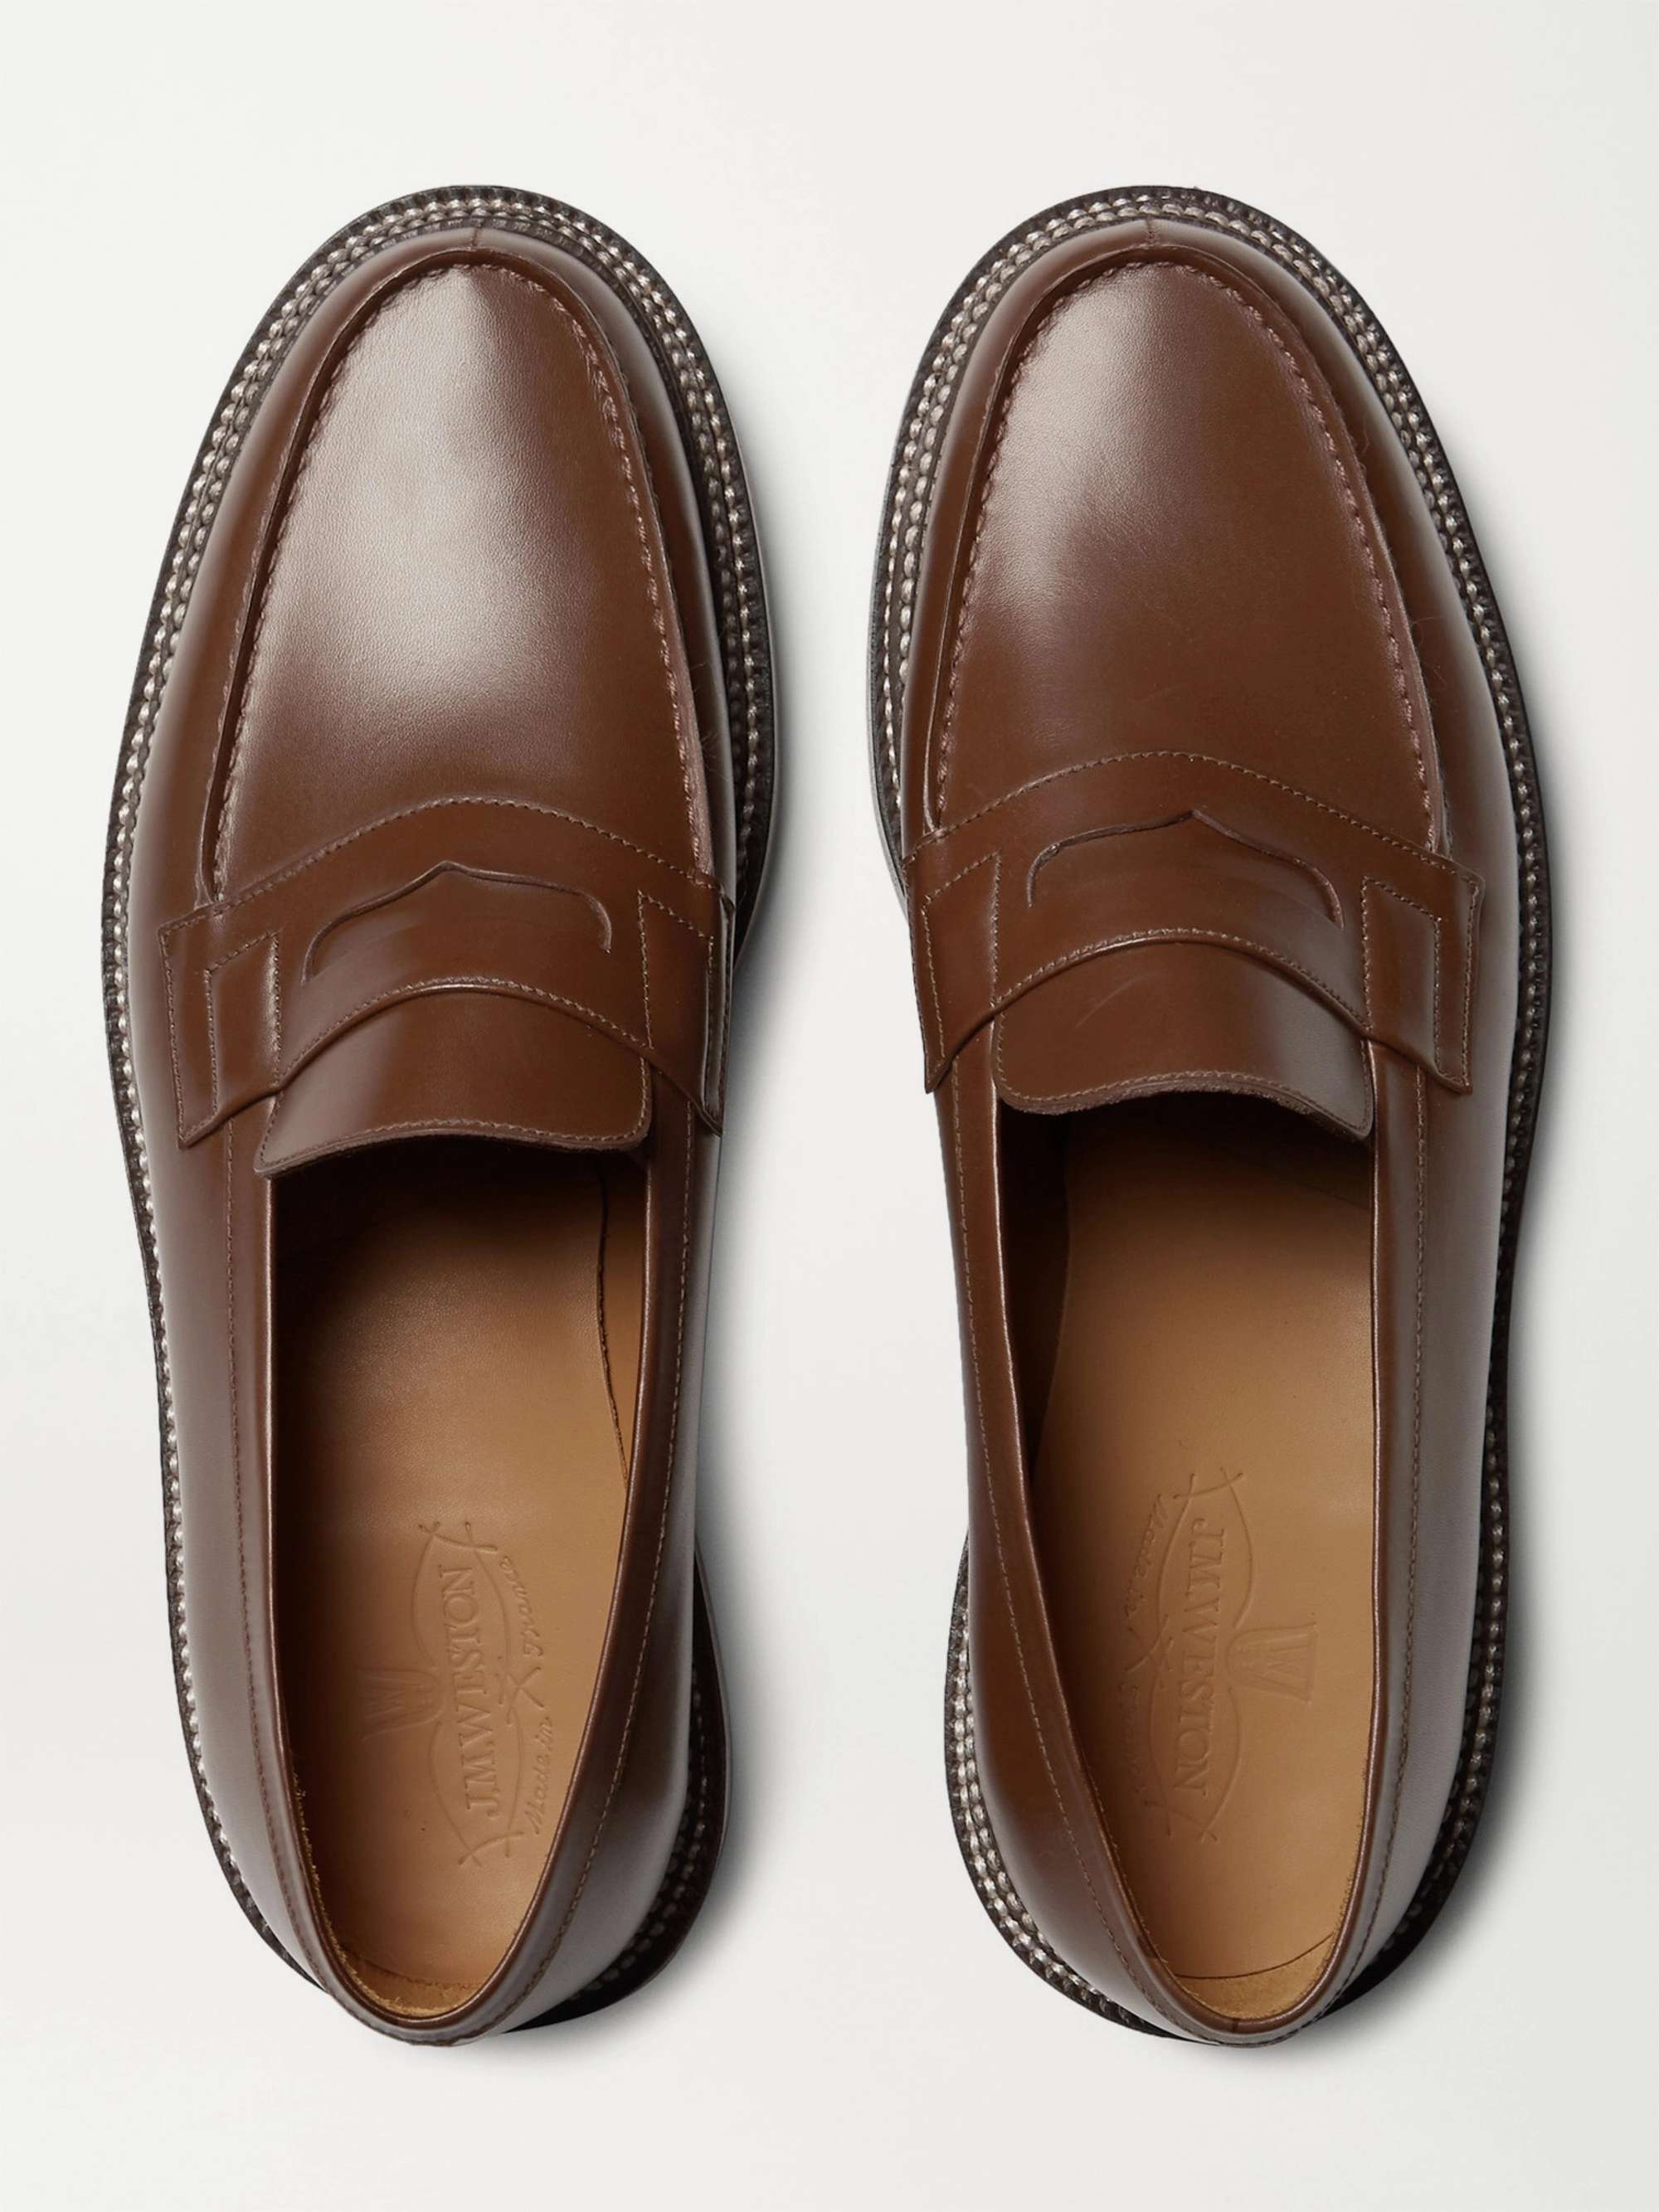 J.M. WESTON 180 The Moccasin Leather Loafers